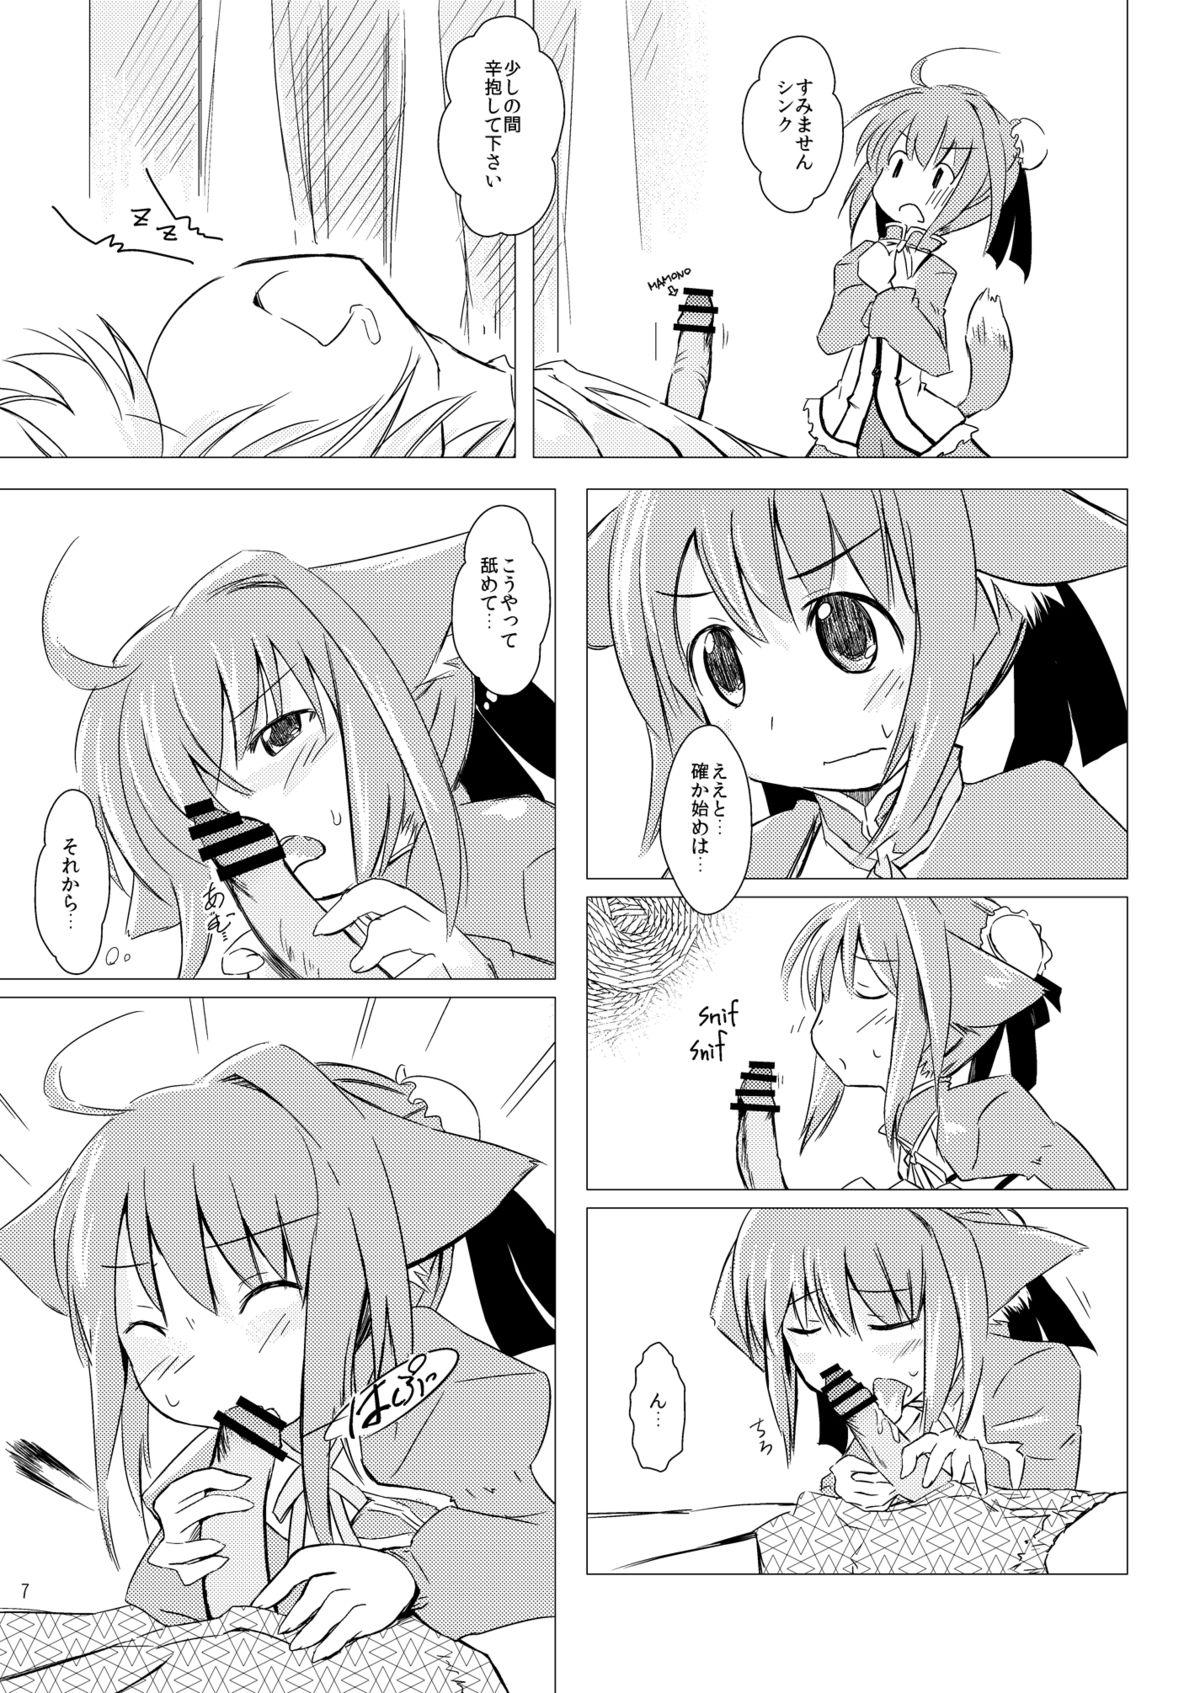 Love Making Millhi no Asa no Undou - Millhiore's Morning Business - Dog days Hermosa - Page 7